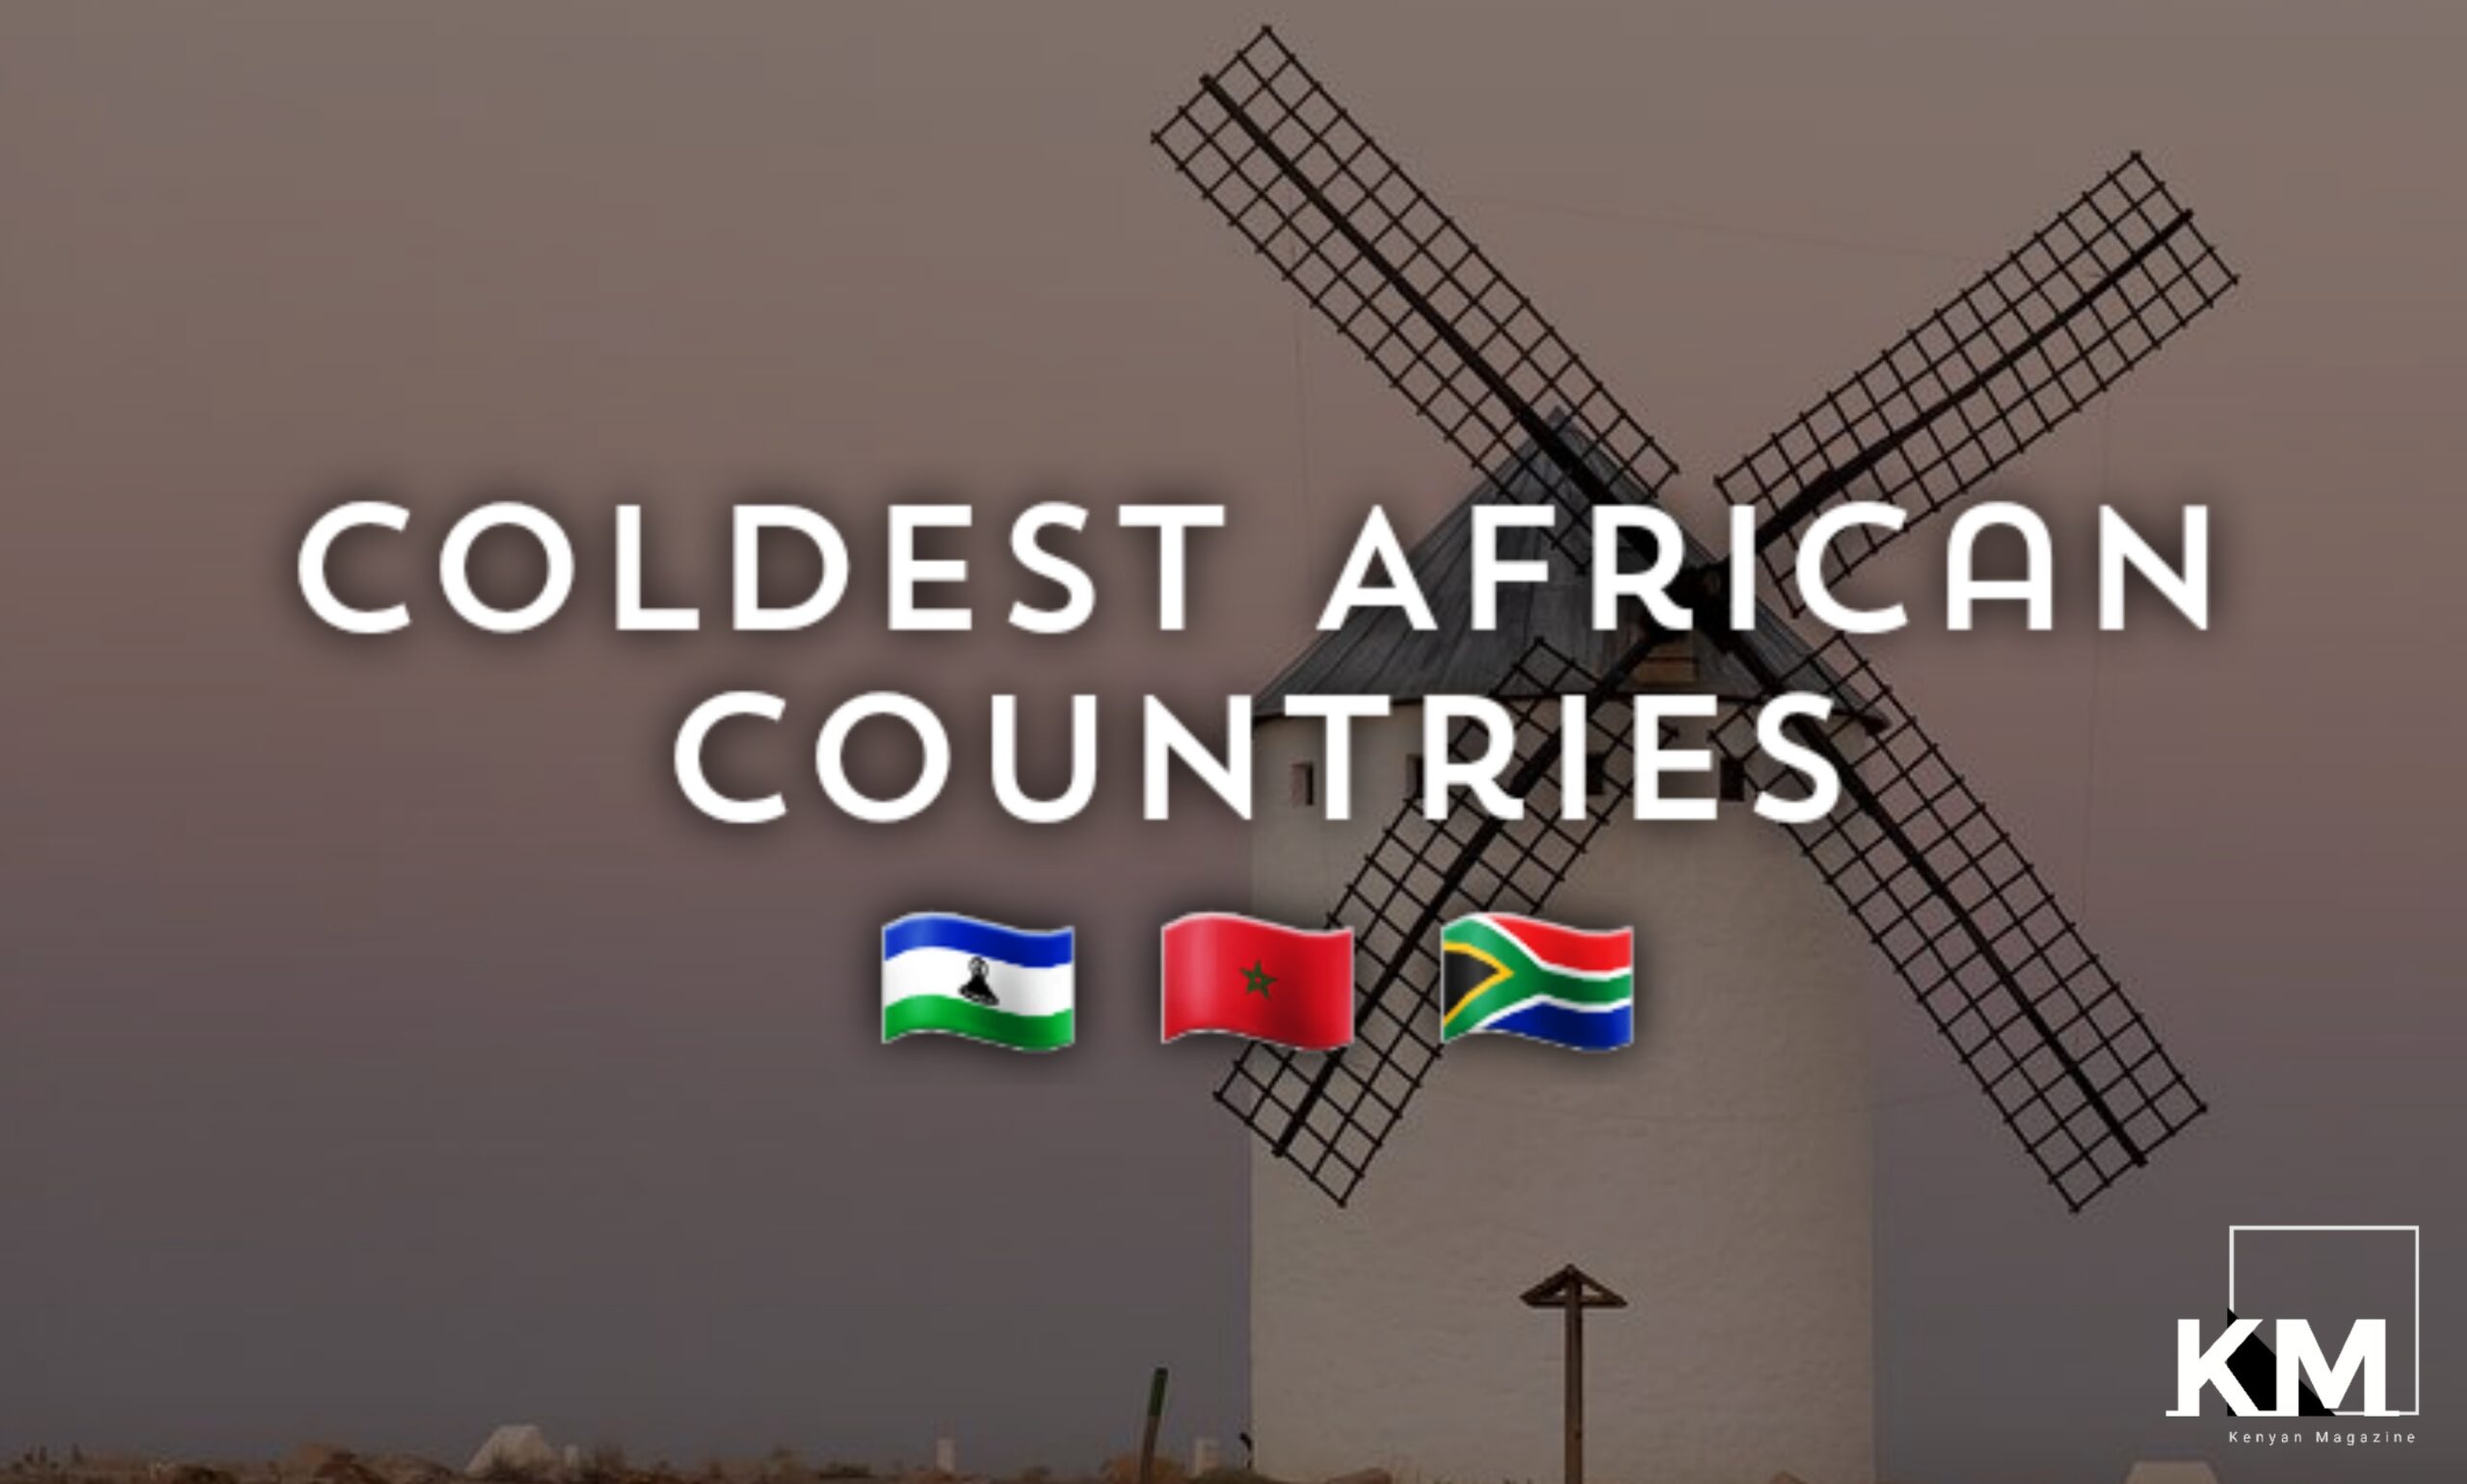 Coldest African Countries